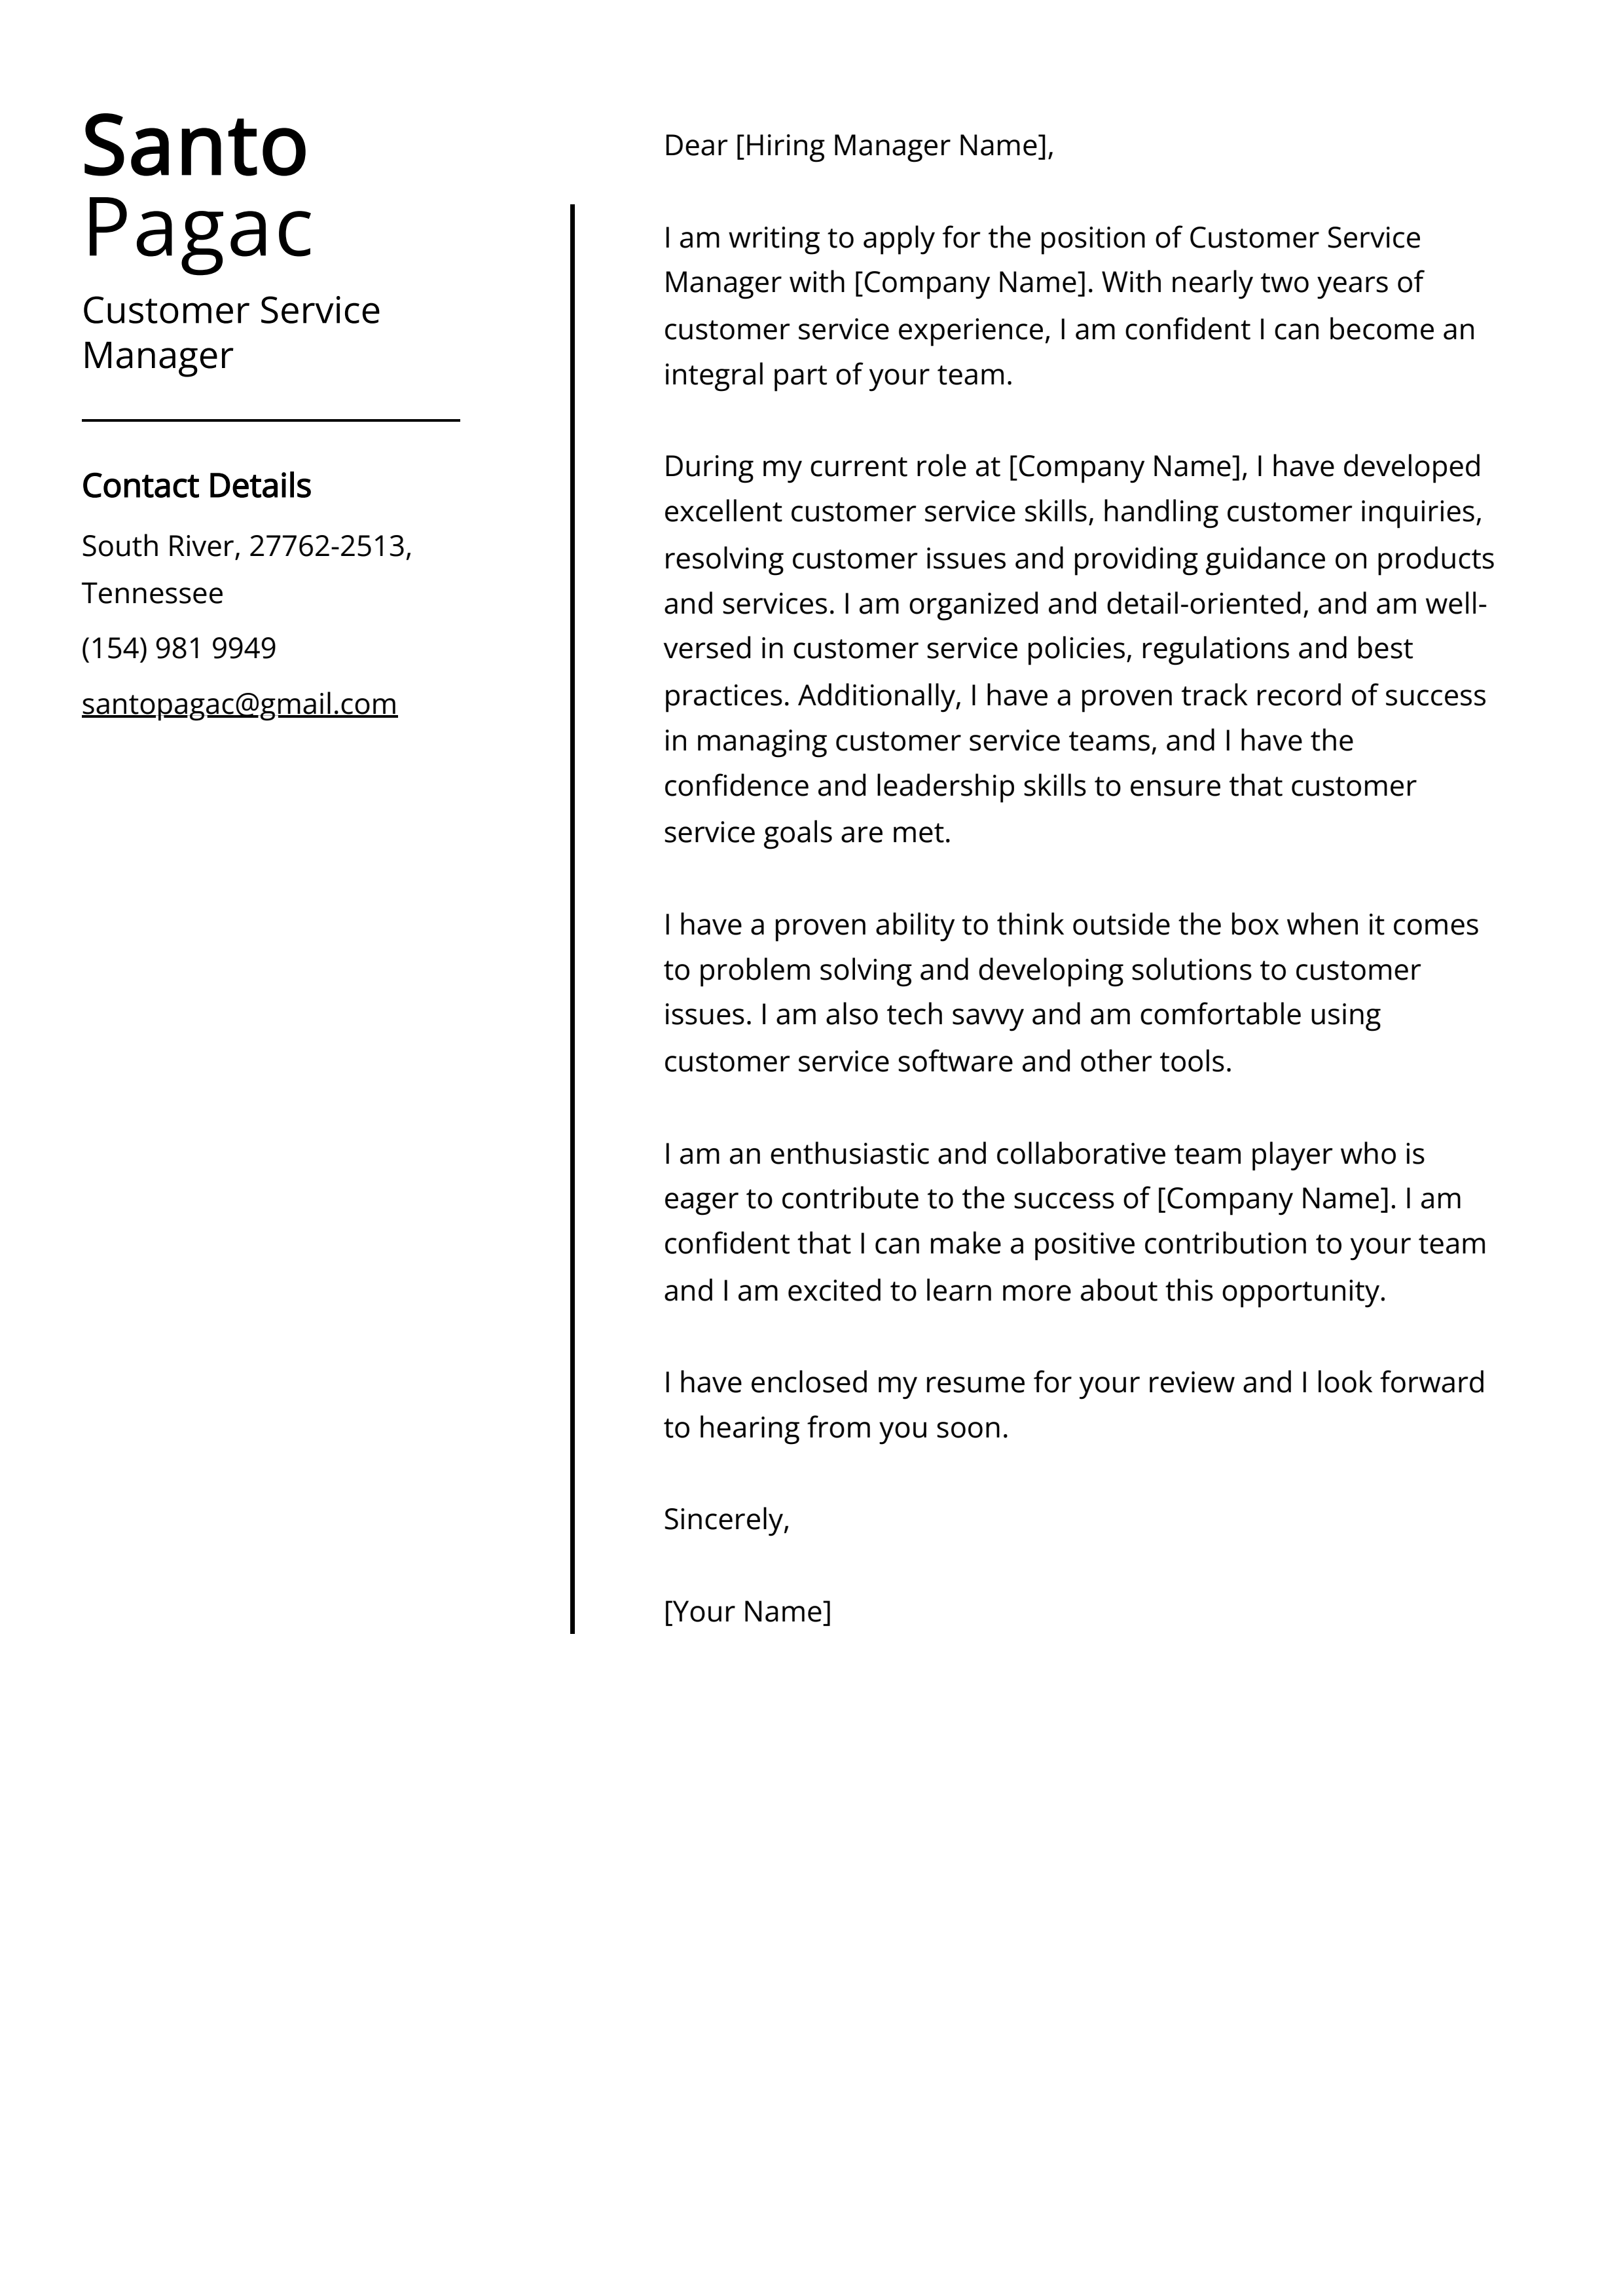 Customer Service Manager Cover Letter Example